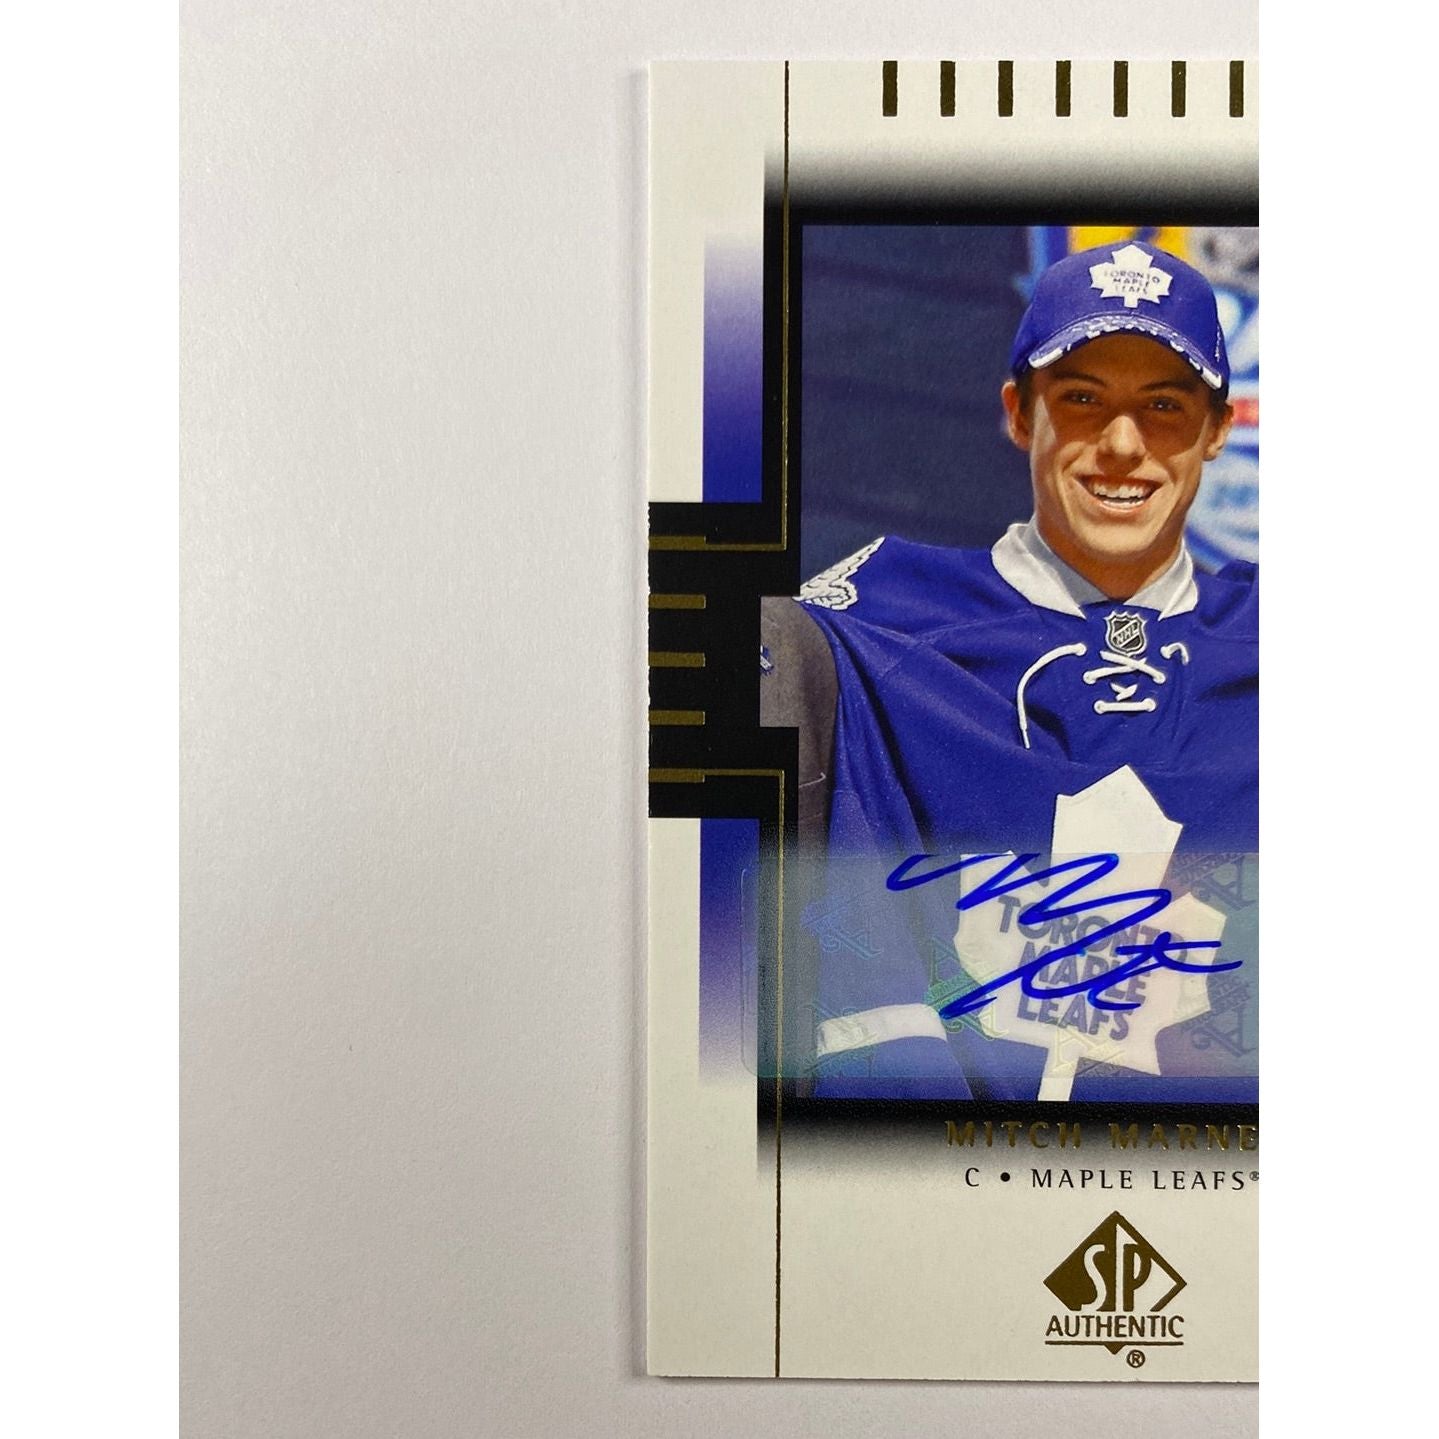 2018-19 SP Authentic Mitch Marner Draft Day Auto